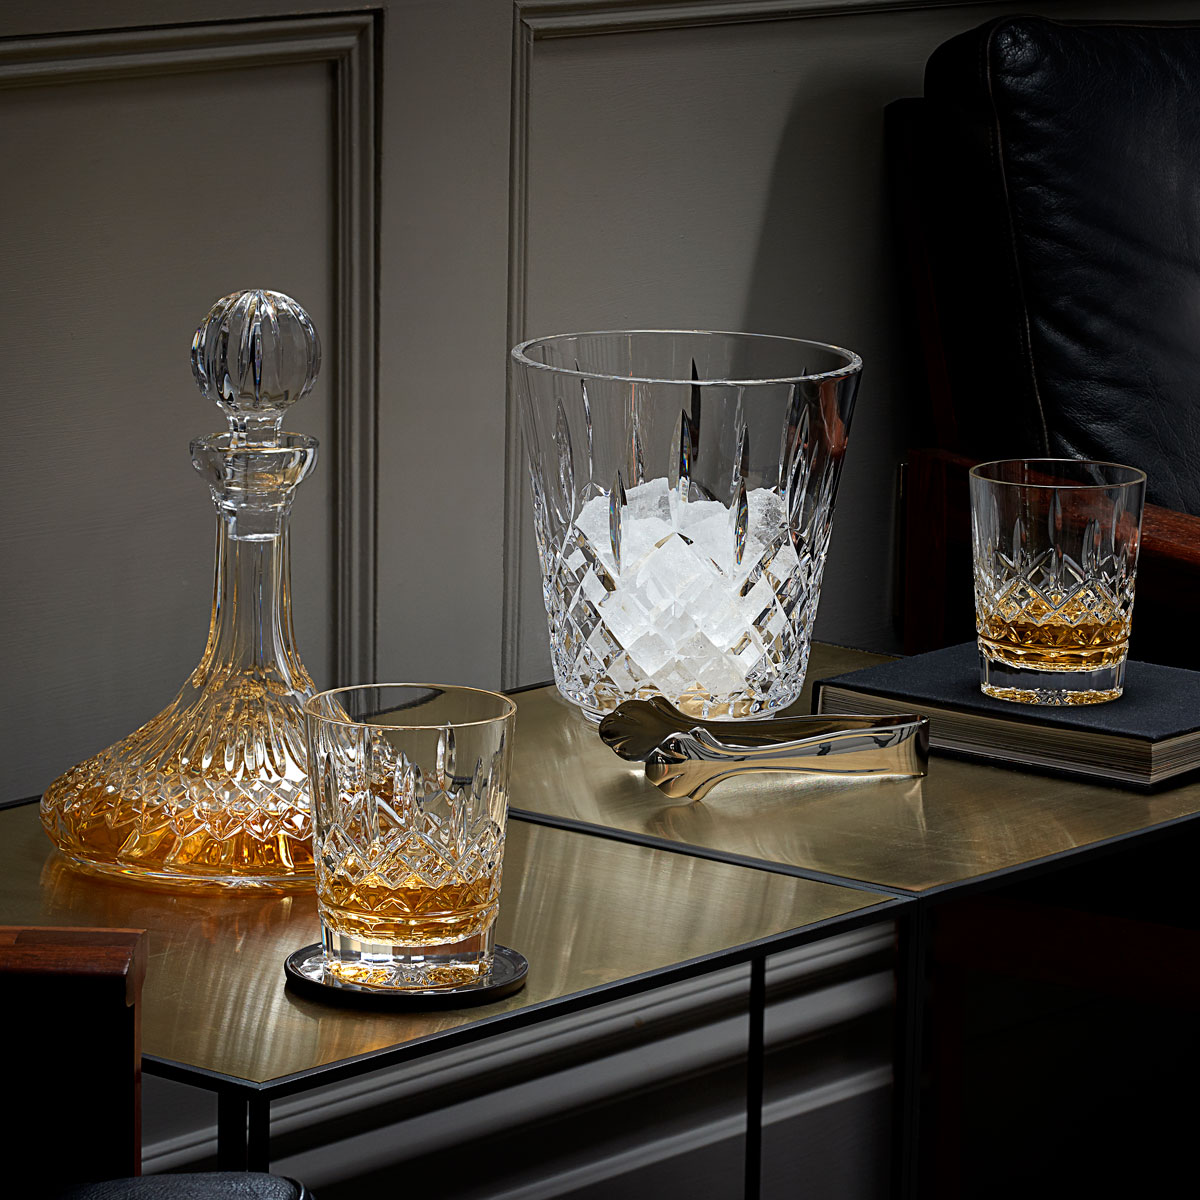 Waterford Crystal Lismore 12 oz Double Old Fashion DOF Tumbler Glasses, Pair